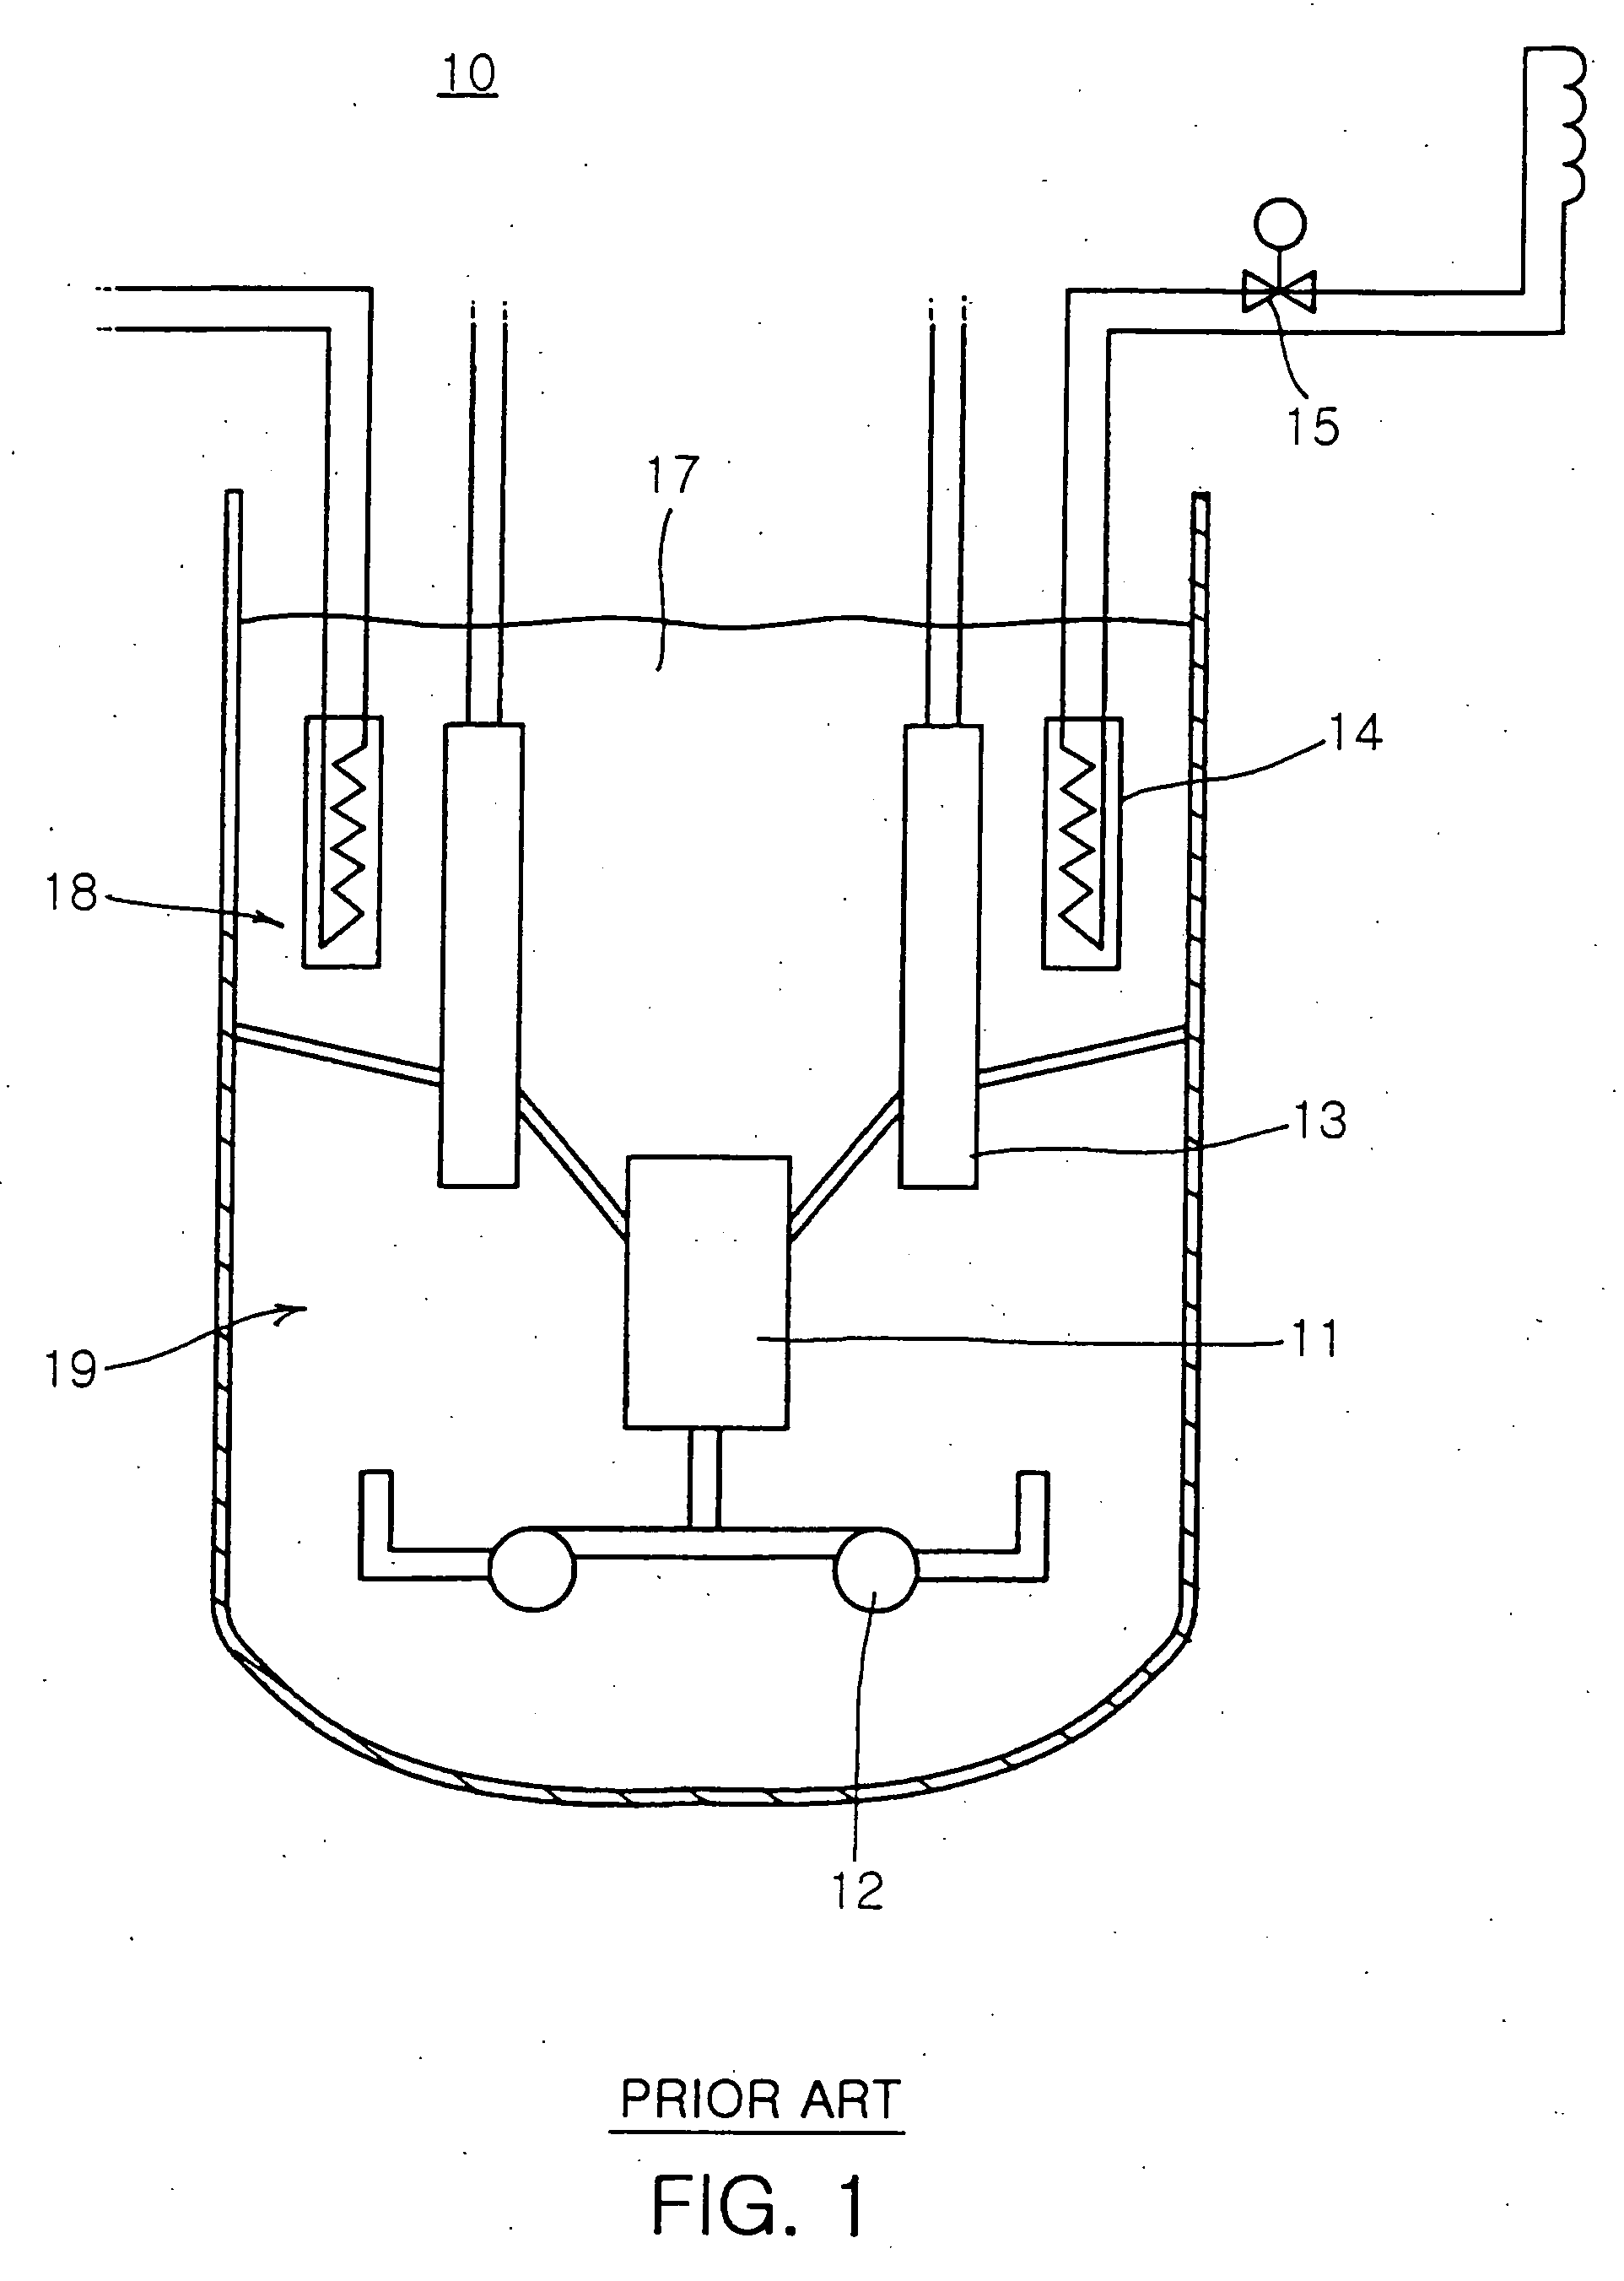 Stable and passive decay heat removal system for liquid metal reactor